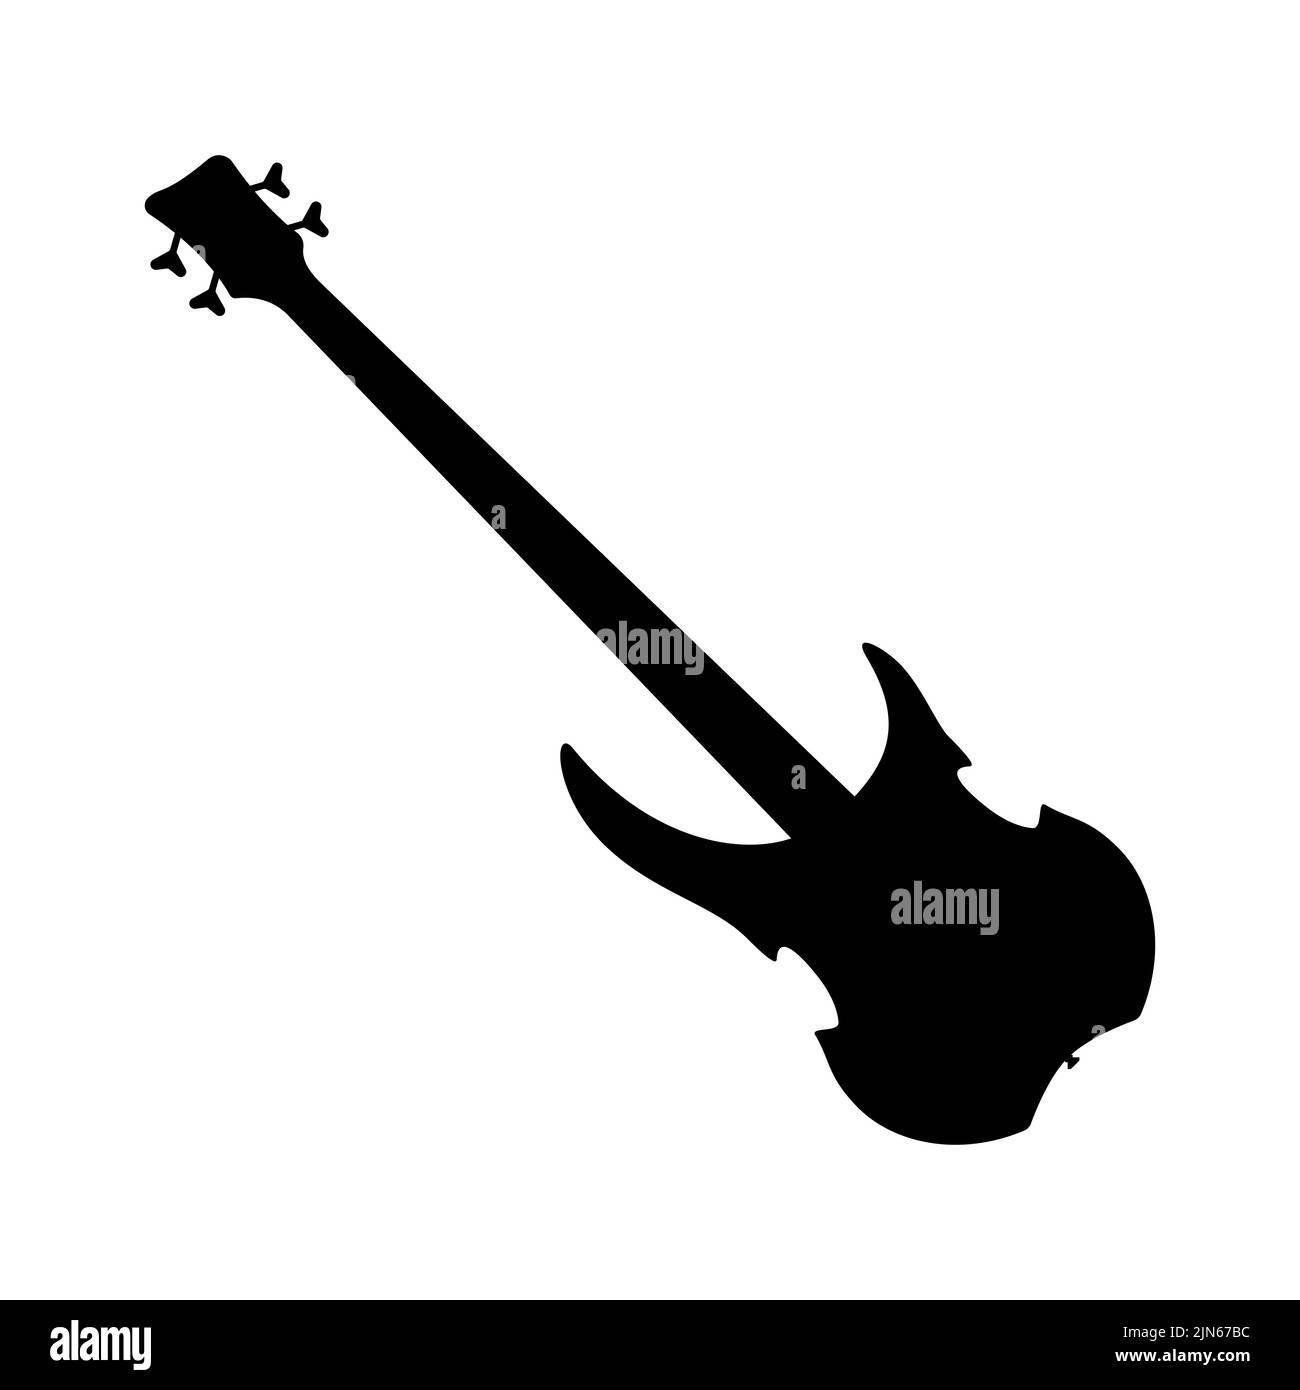 Electric bass guitar icon. Black silhouette of guitar. Music instrument icon isolated. Vector illustration. Stock Vector